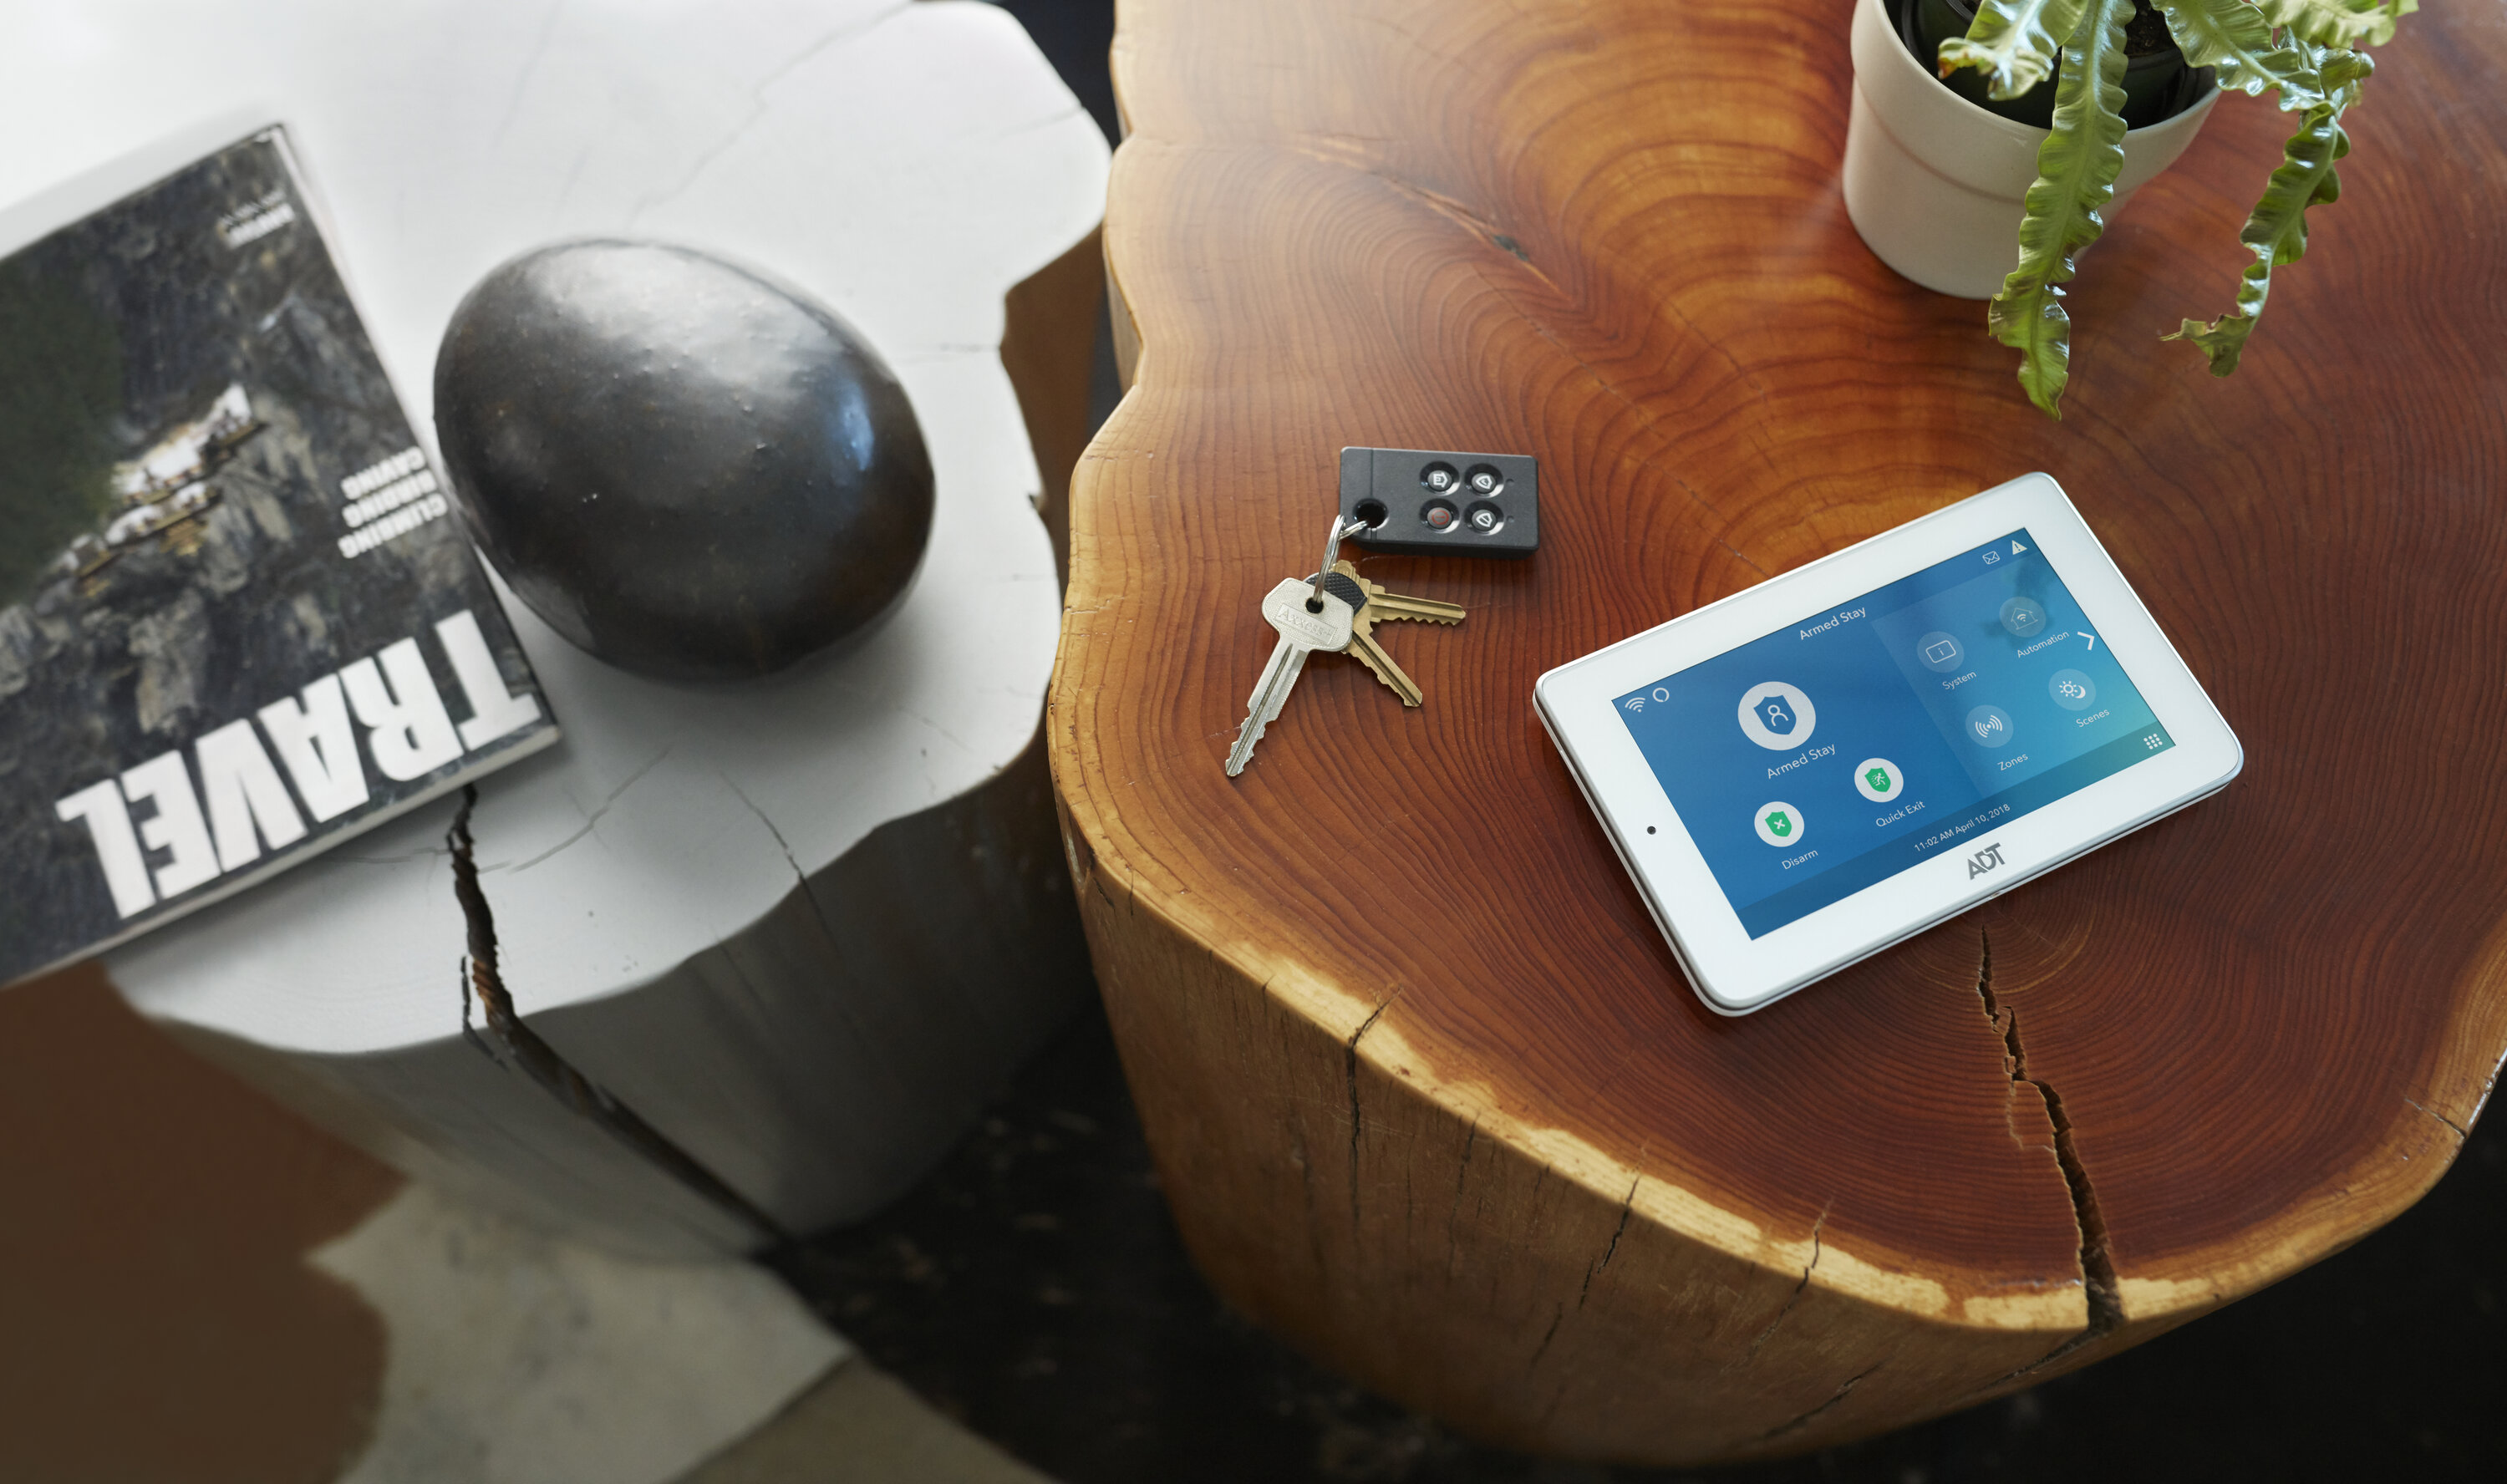 An ADT security touchscreen device sits on a wooden coffee table next to keys, a green plant, and a travel book